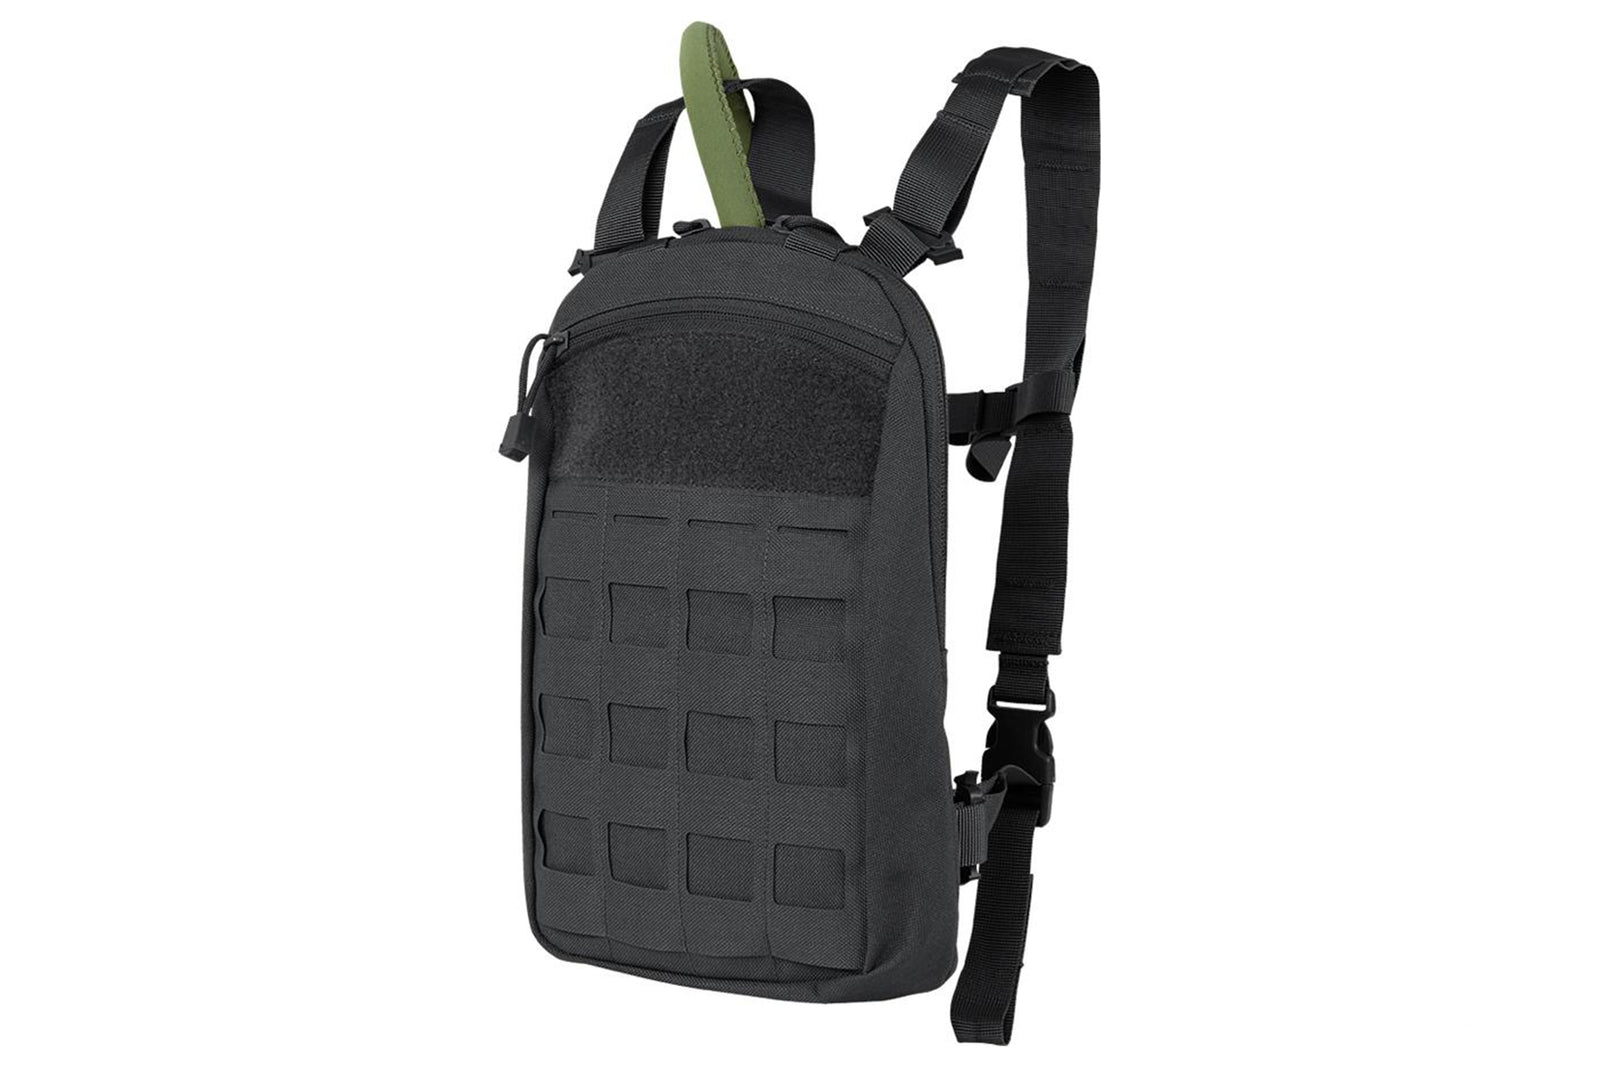 Condor LCS Tidepool Hydration Carrier